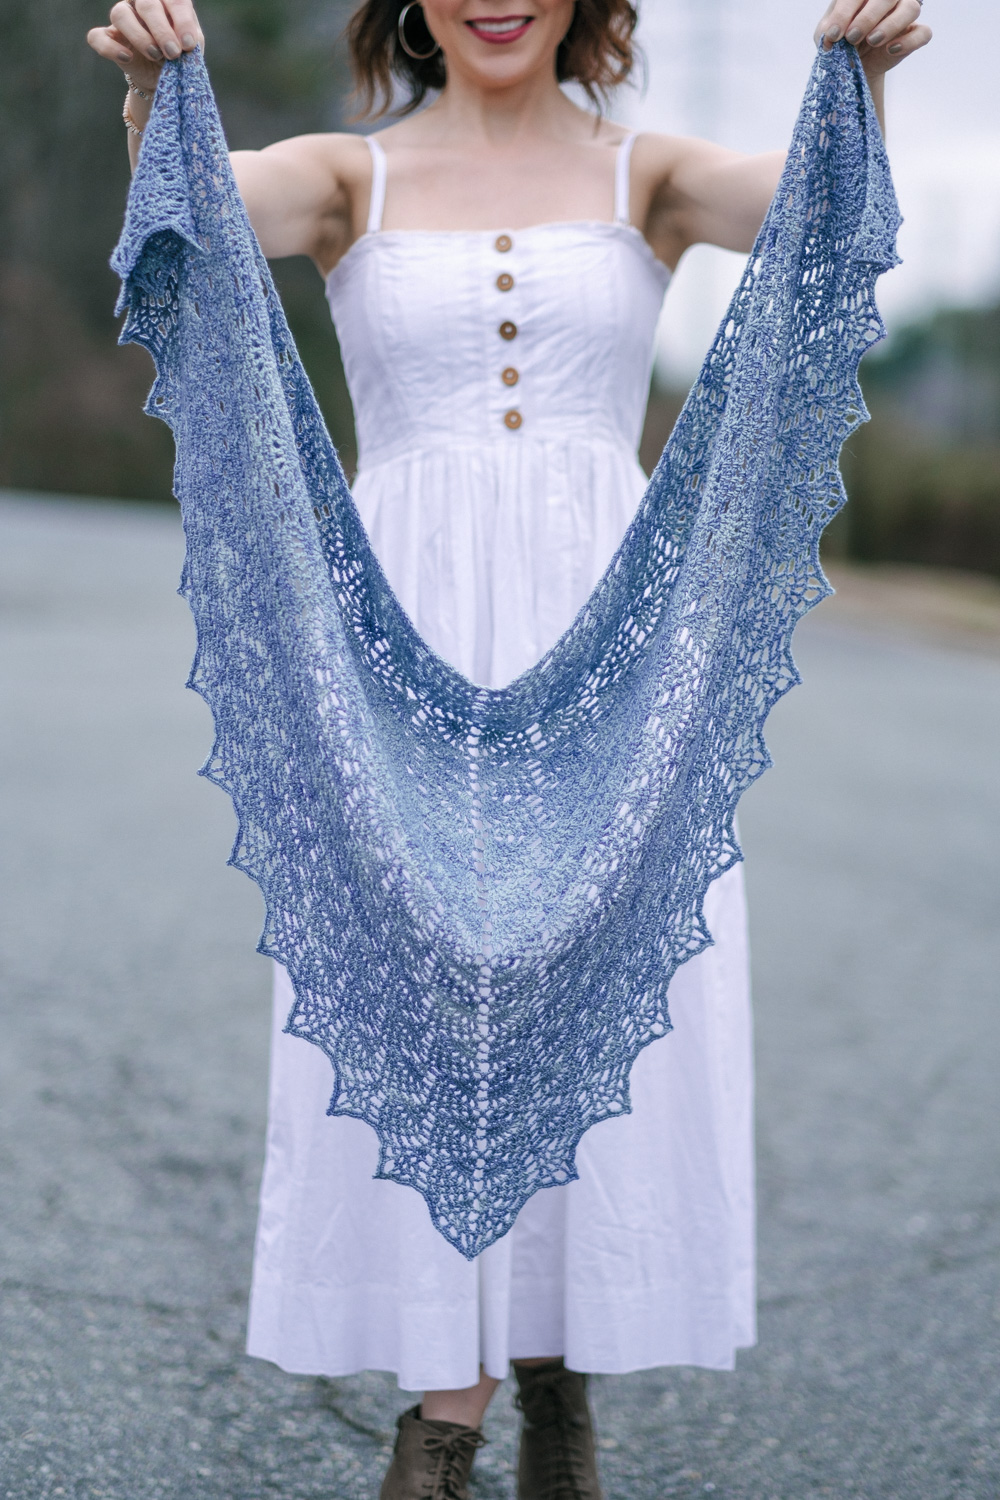 crochet adeline shawl pattern with video